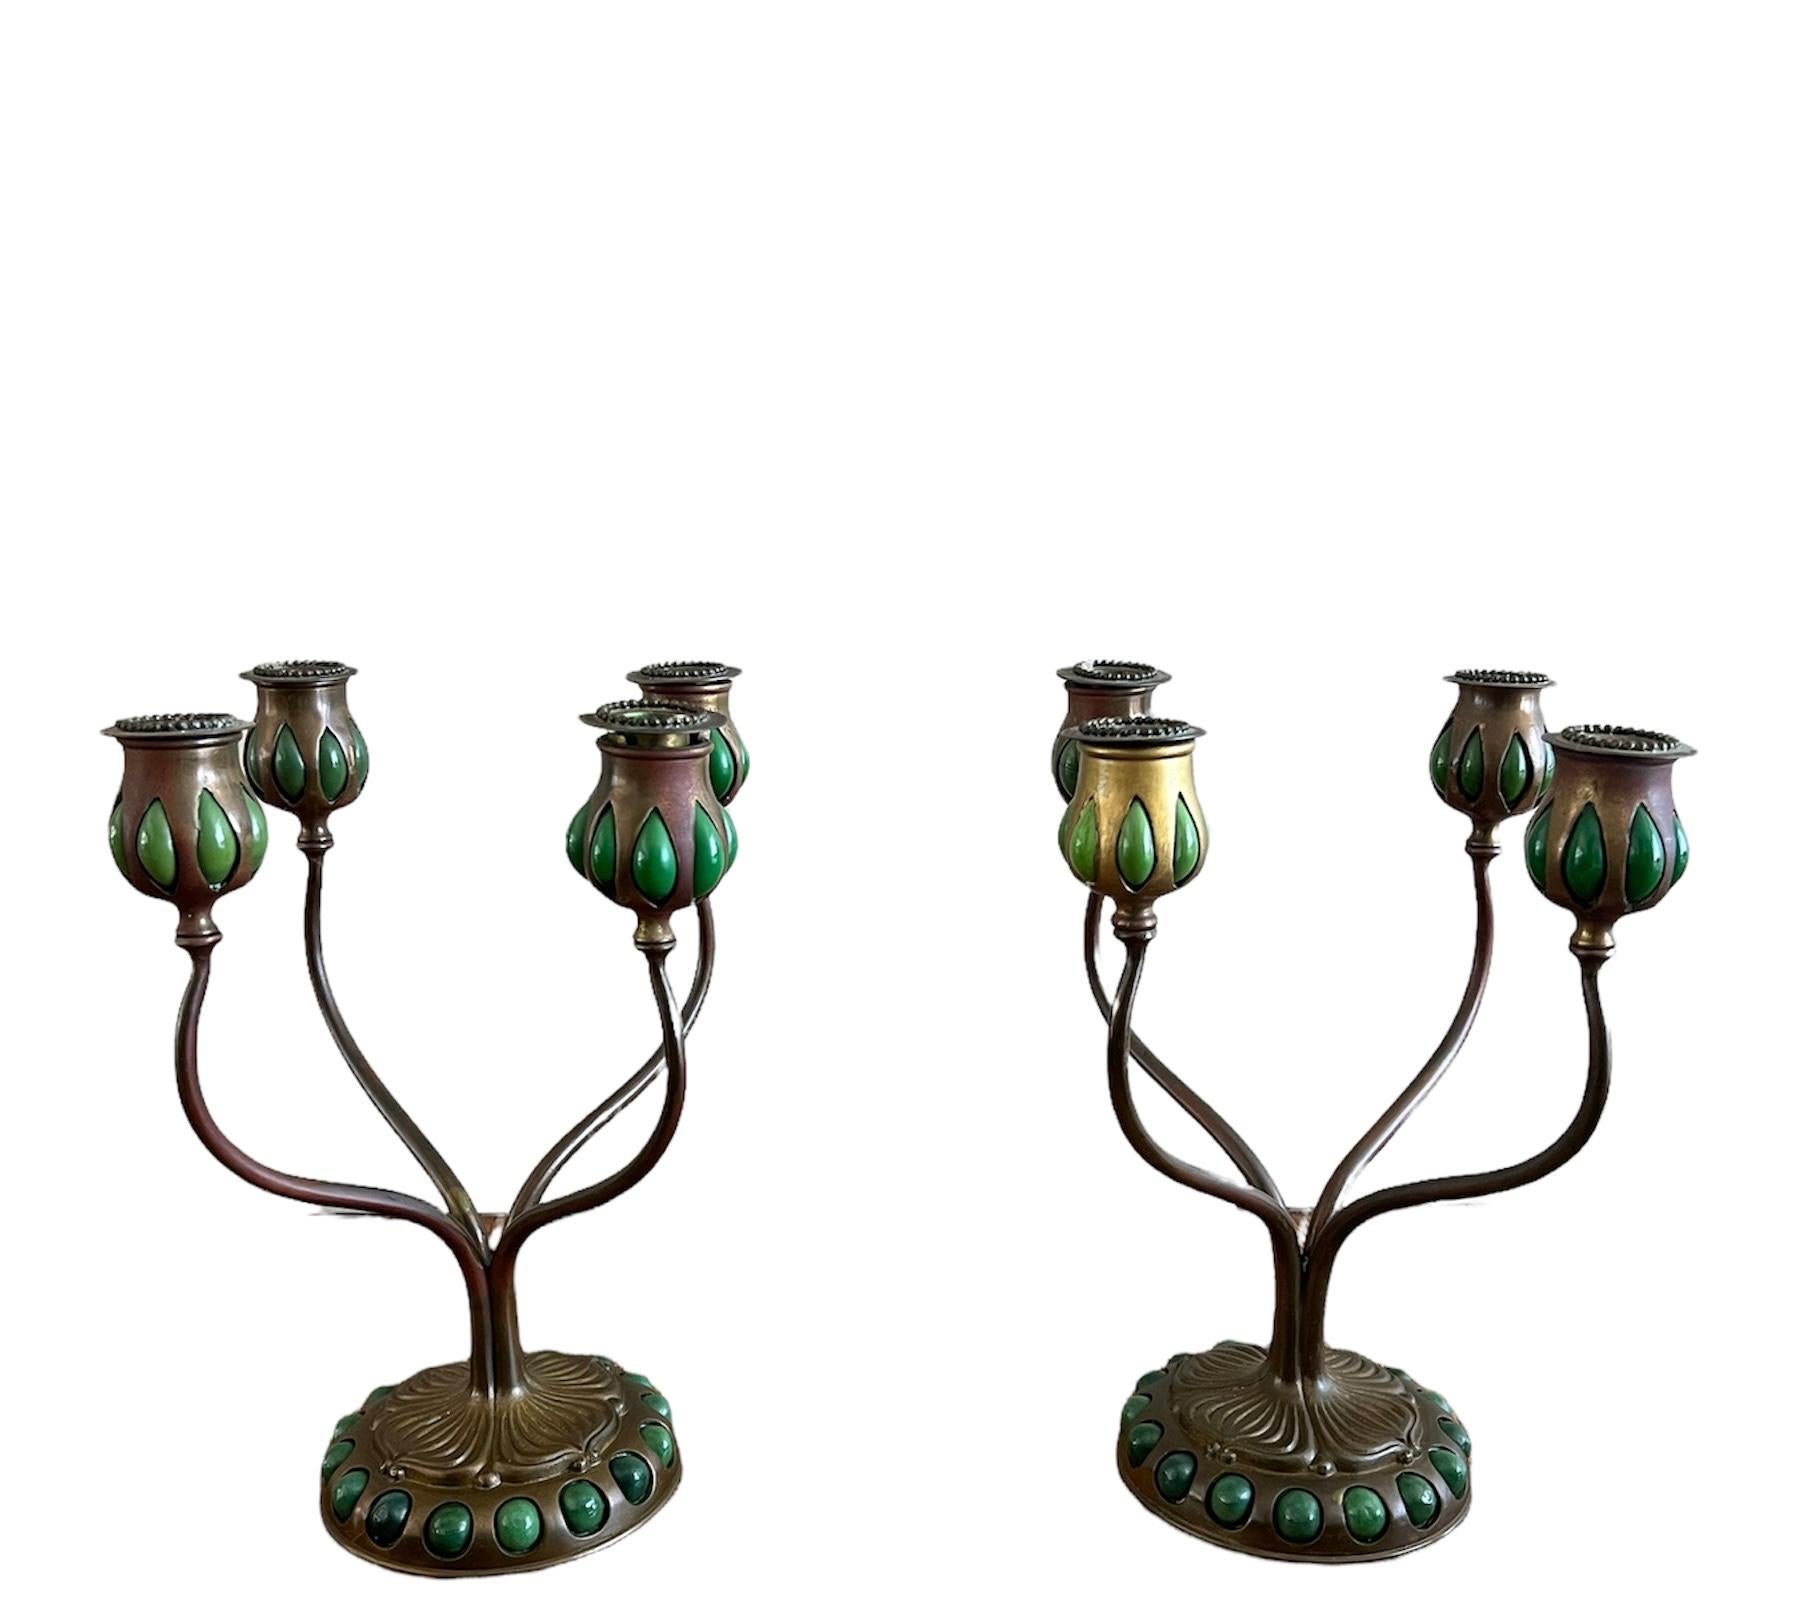 - The candleholders are made out of bronze with green favrile glass detail
- It features floral motif
- Four candle holders in each arm
-  Boyj candlesticks signed on the bottom: Tiffany Studios New York and numbered D556 4 & D556